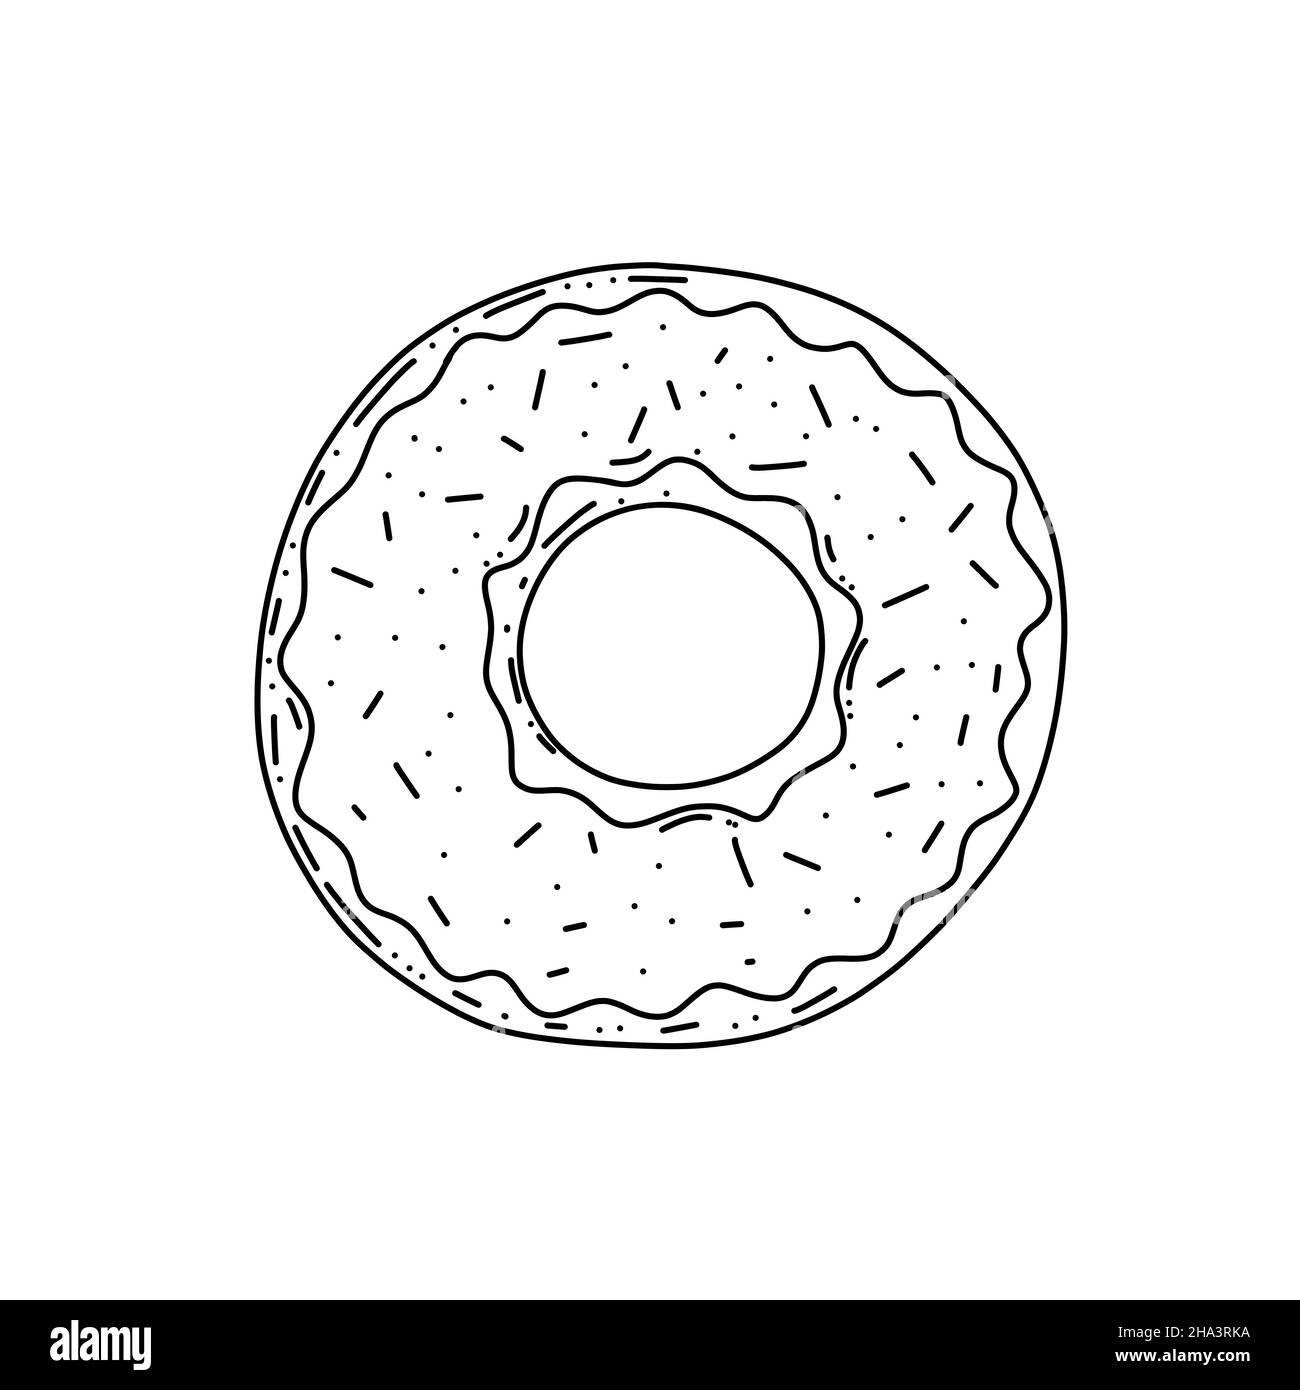 Donut bite black and white stock photos images